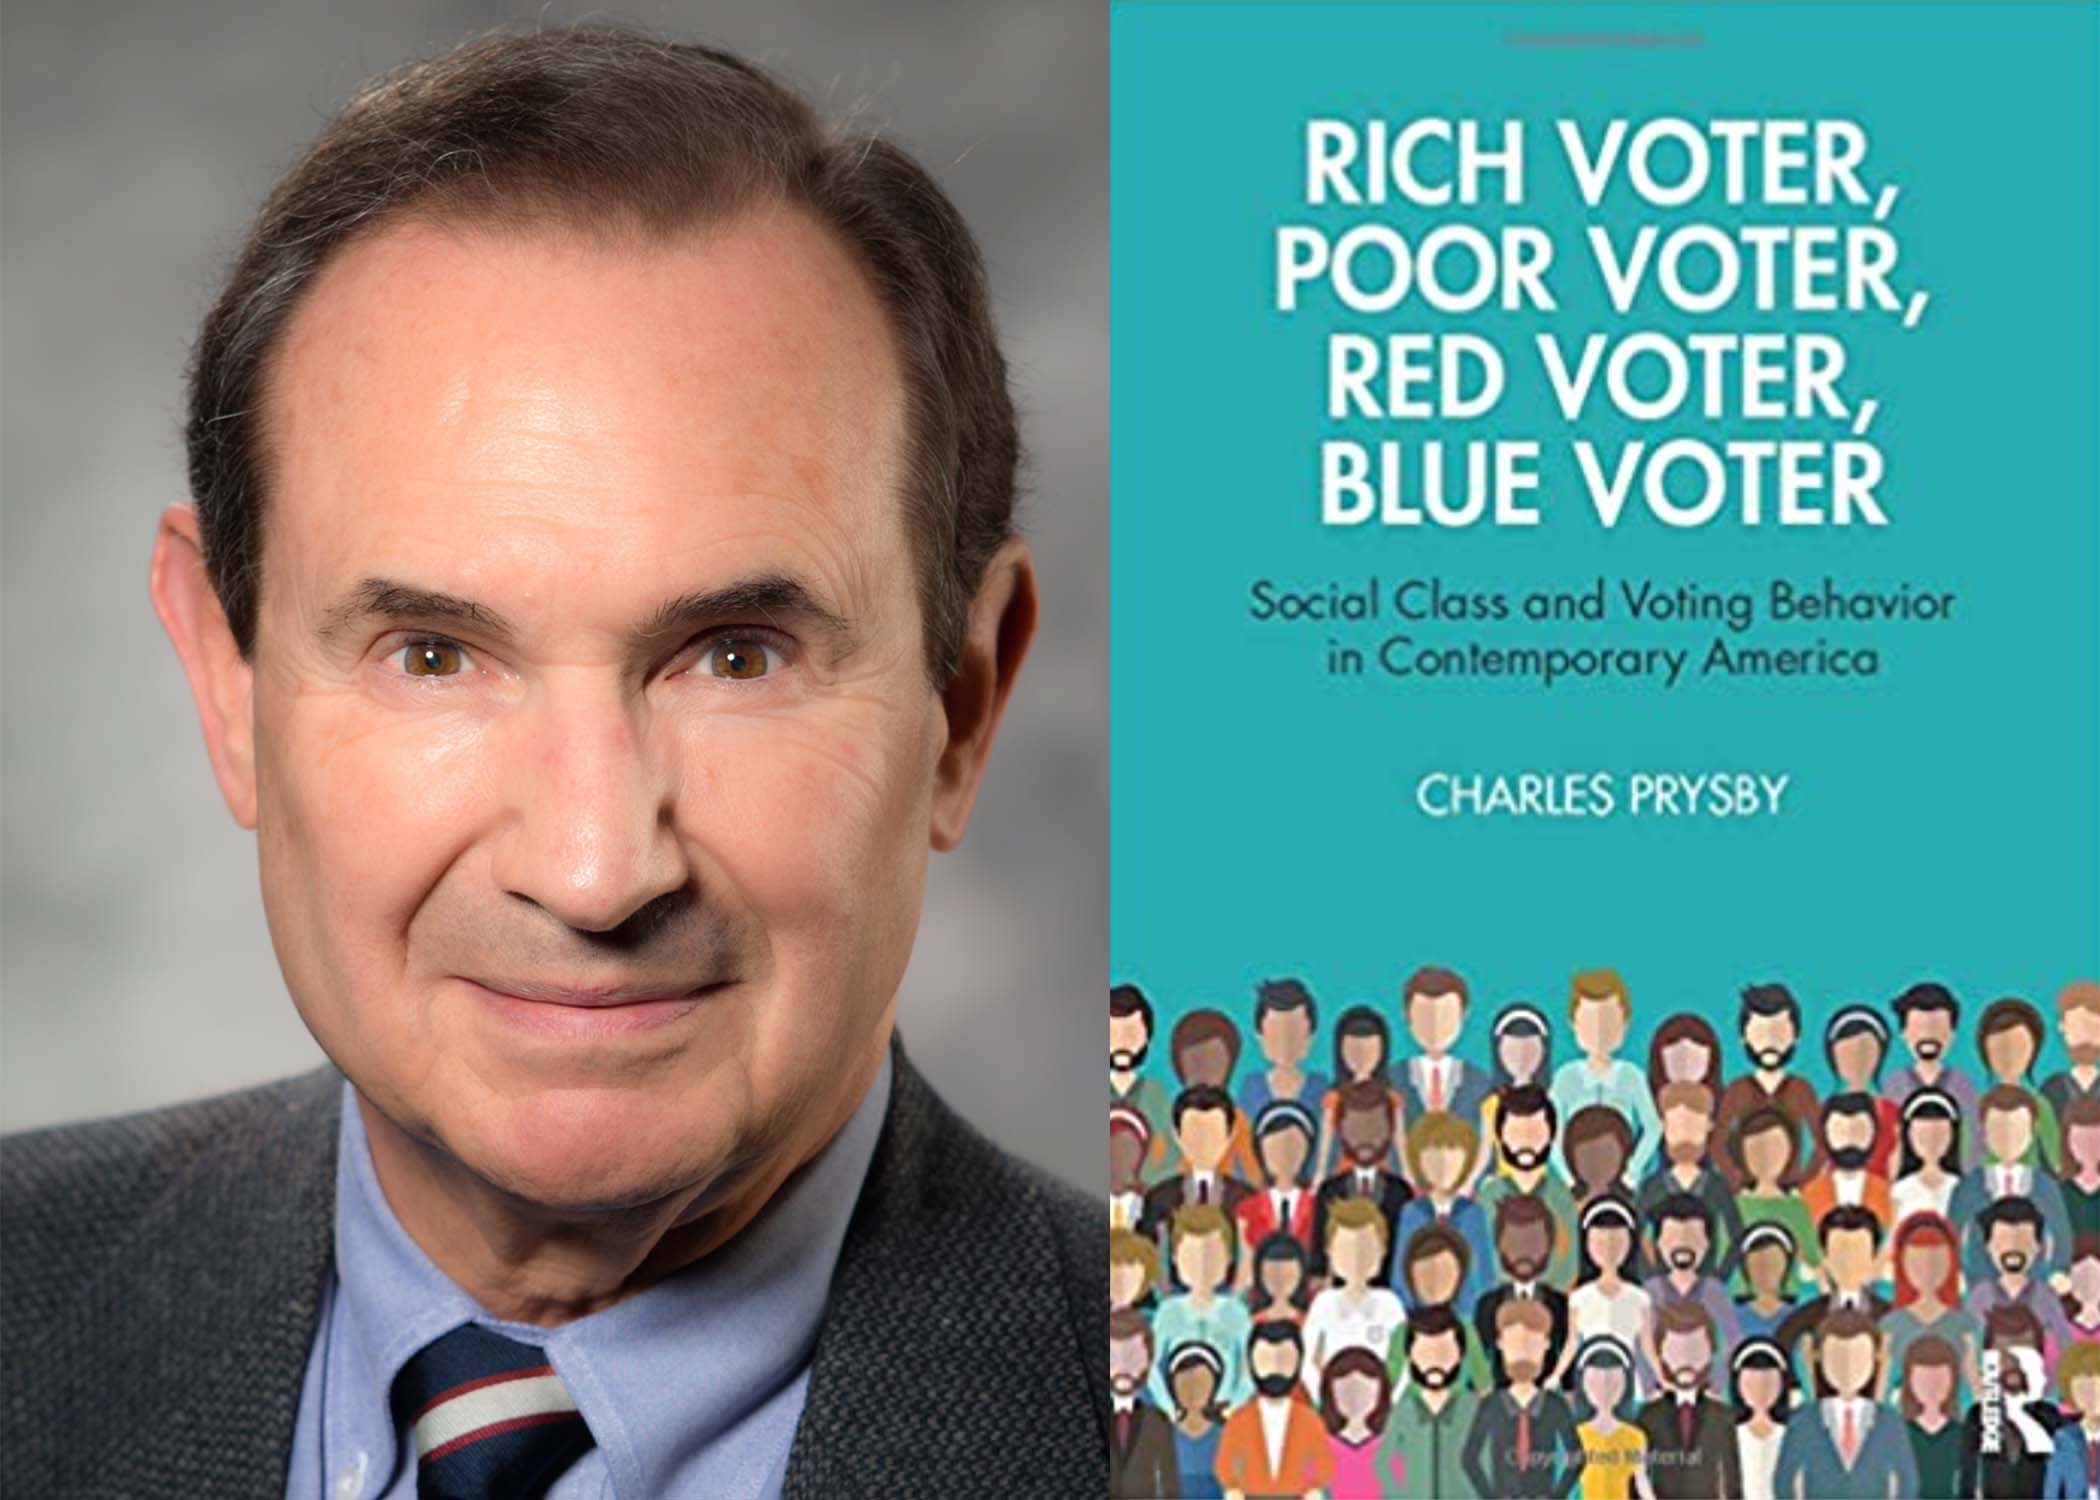 Dr. Pryby and cover of his book Rich Voter, Poor Voter, Red Voter, Blue Voter